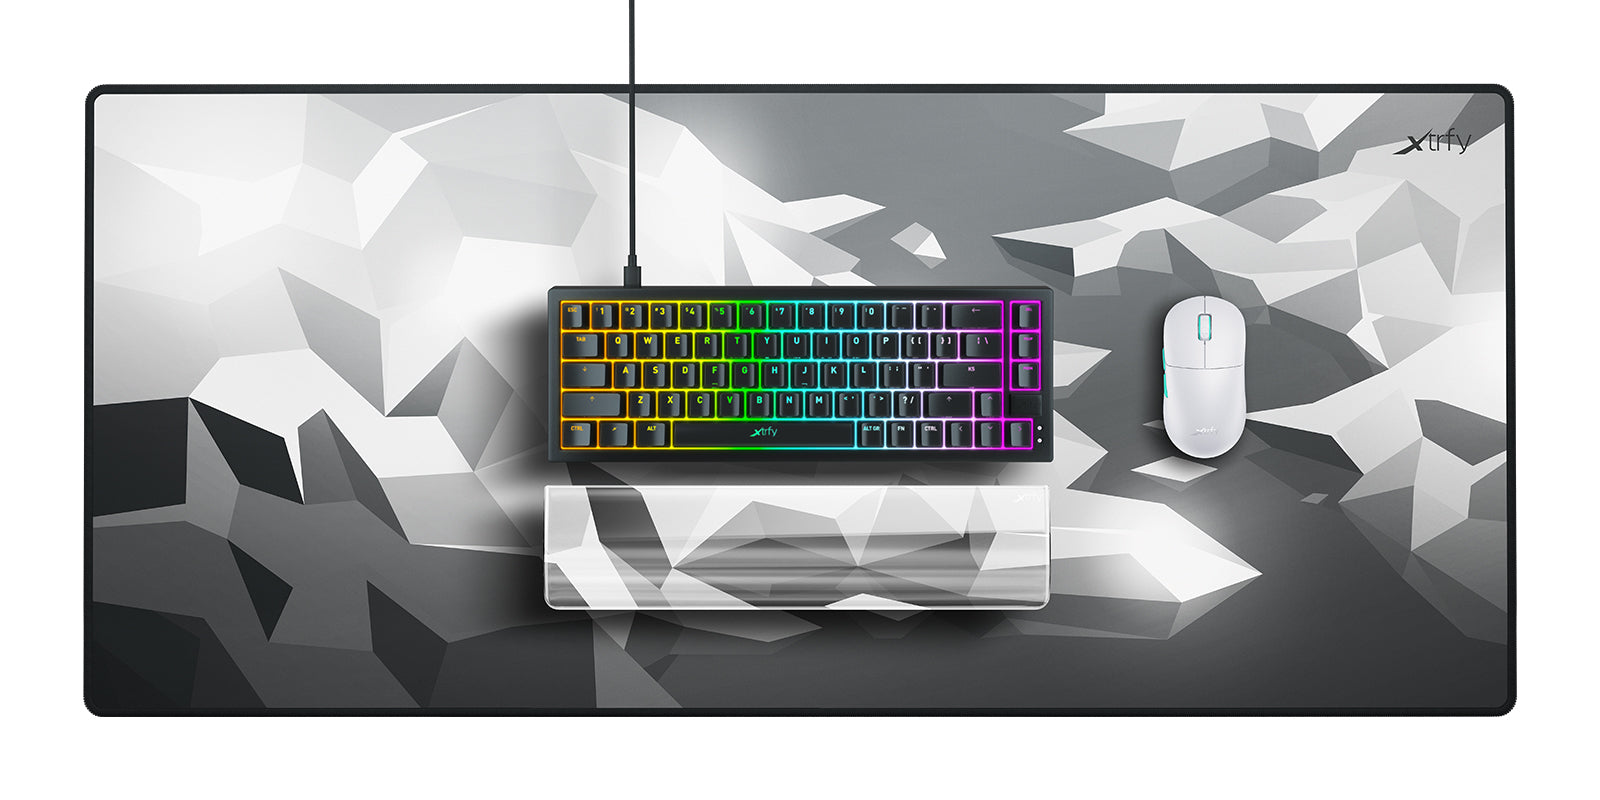 Xtrfy WR5 Compact Litus White, Resin Wrist Rest for 65% keyboards Xtrfy Gaming AB